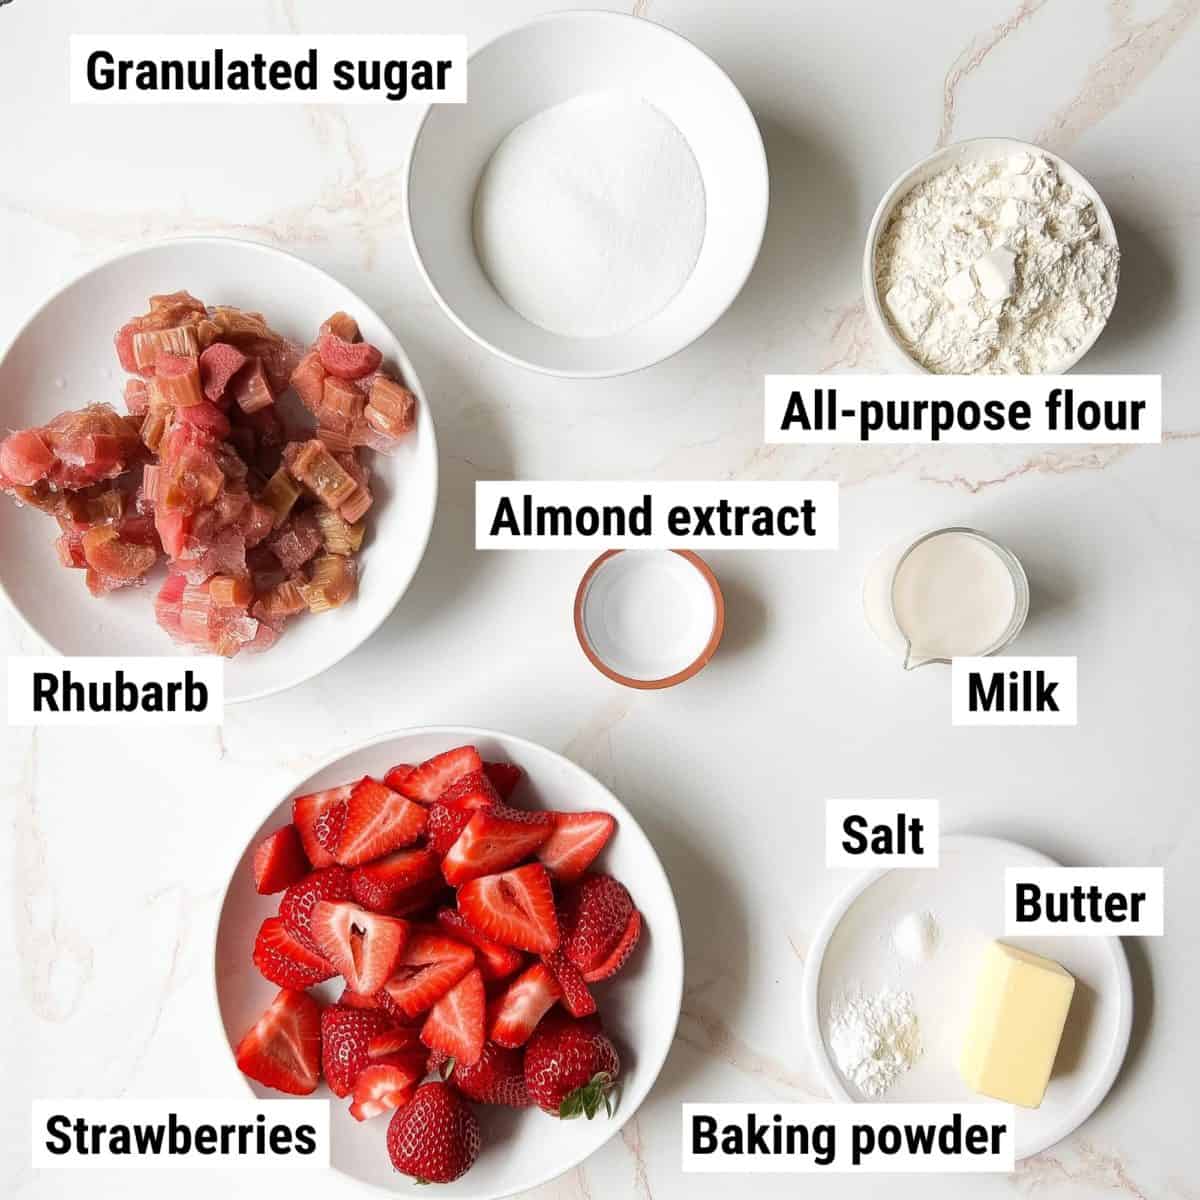 The recipe ingredients used to make strawberry rhubarb cobbler spread out on a table.